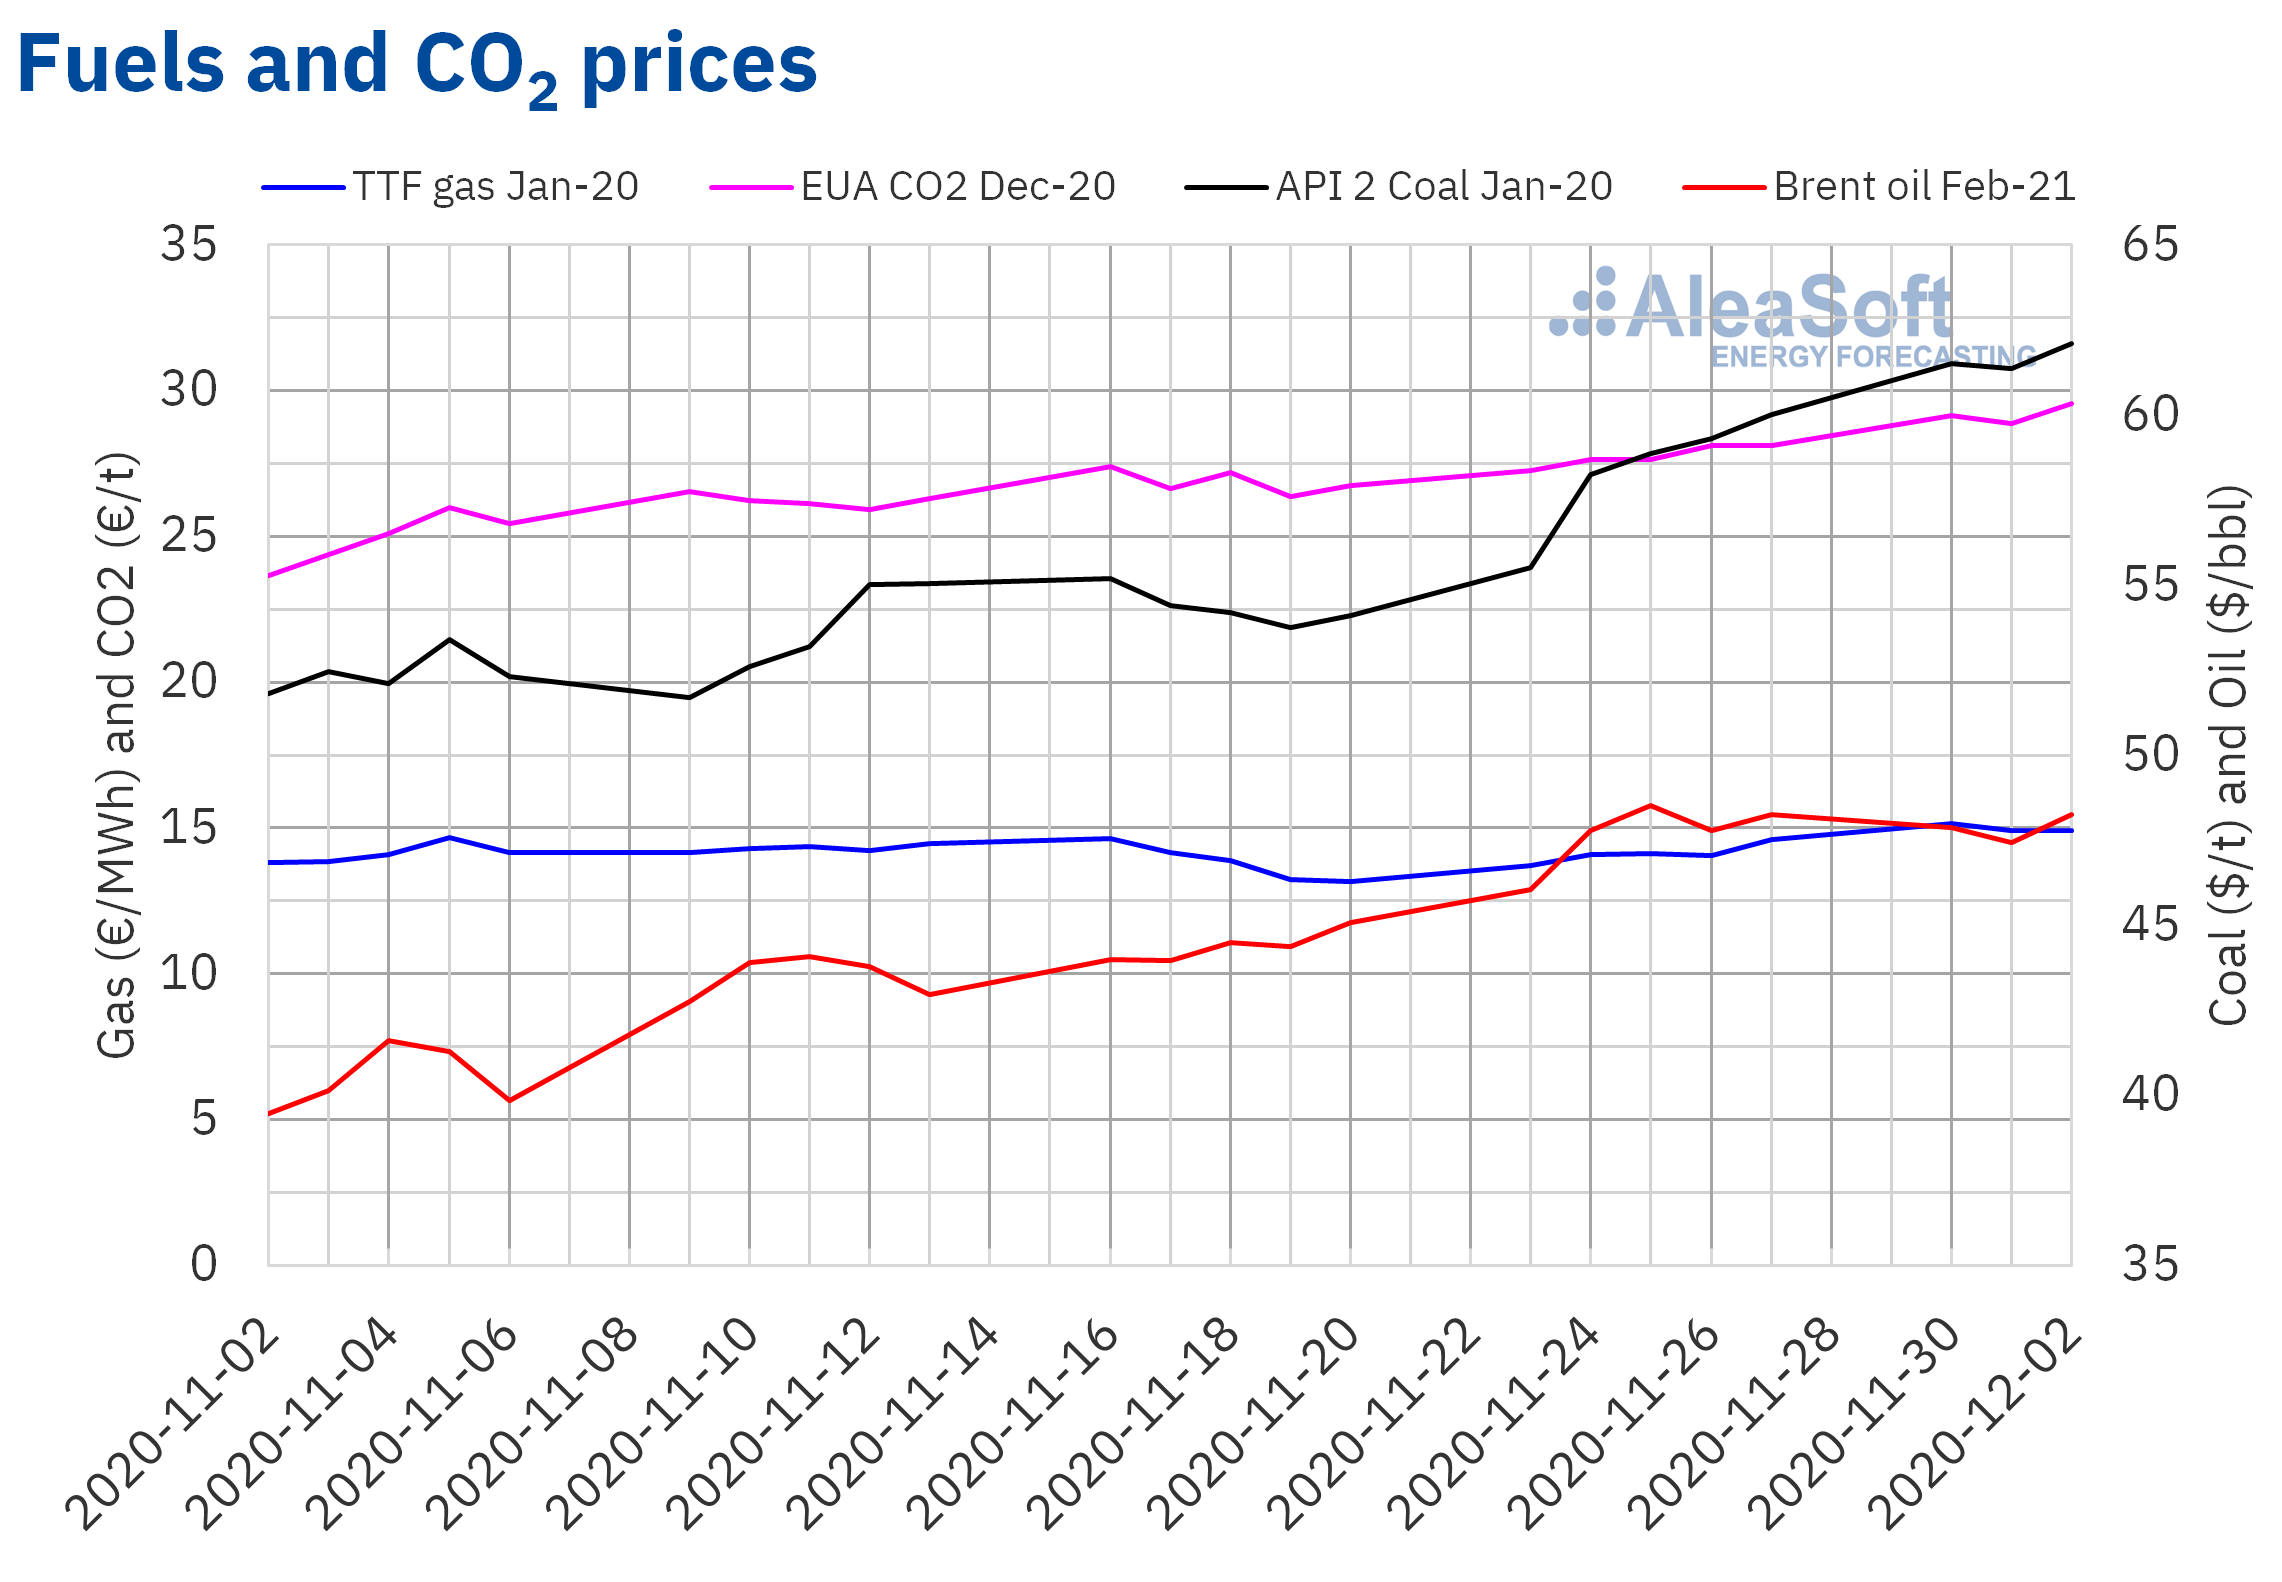 AleaSoft - Prices of gas coal, Brent oil and CO2